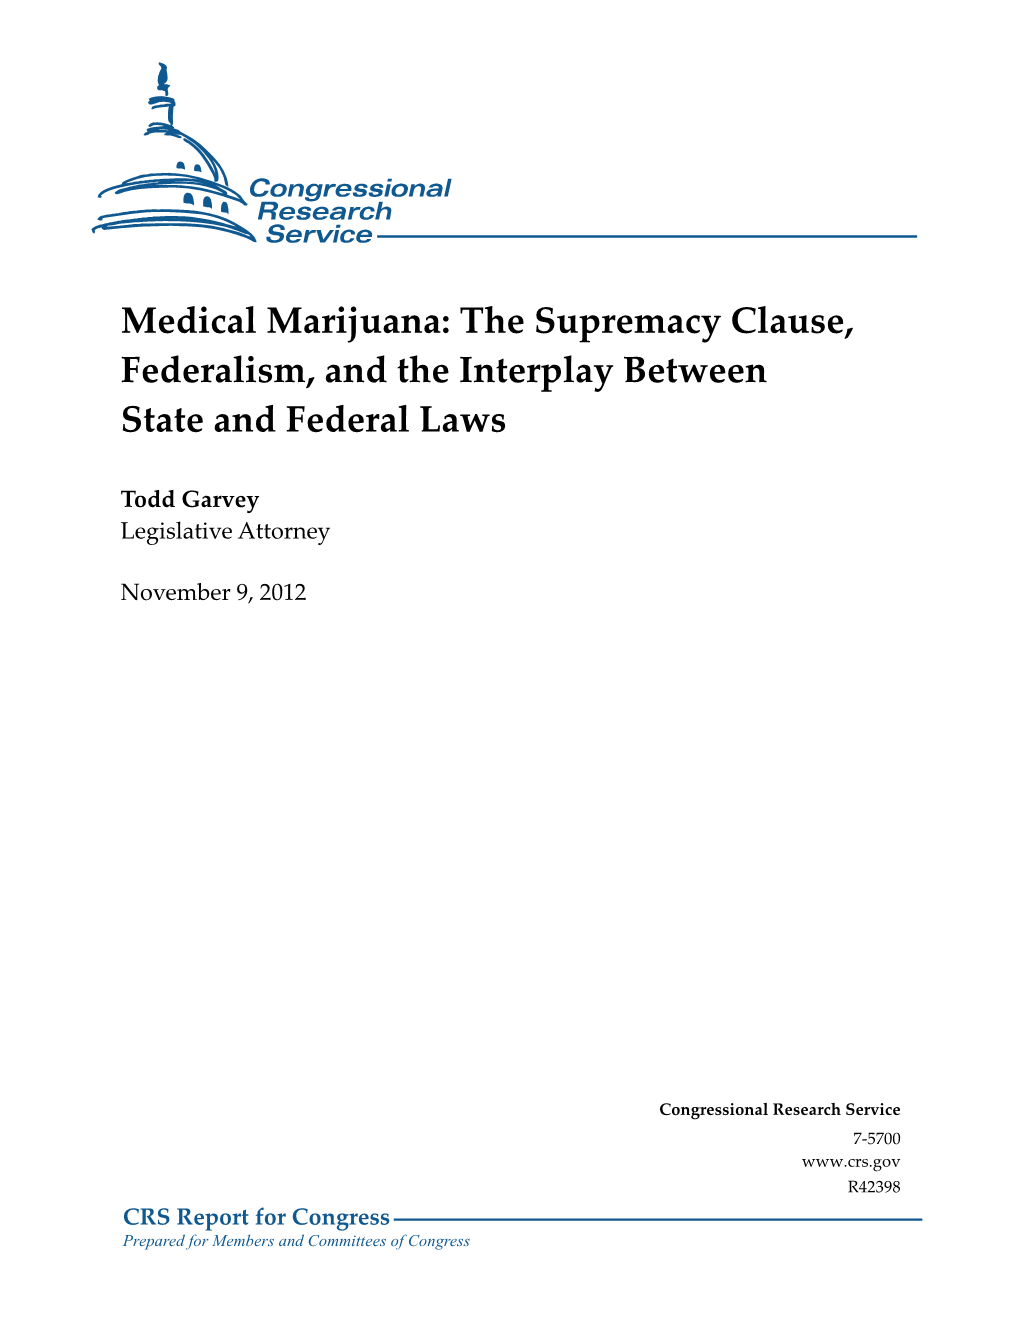 Medical Marijuana: the Supremacy Clause, Federalism, and the Interplay Between State and Federal Laws